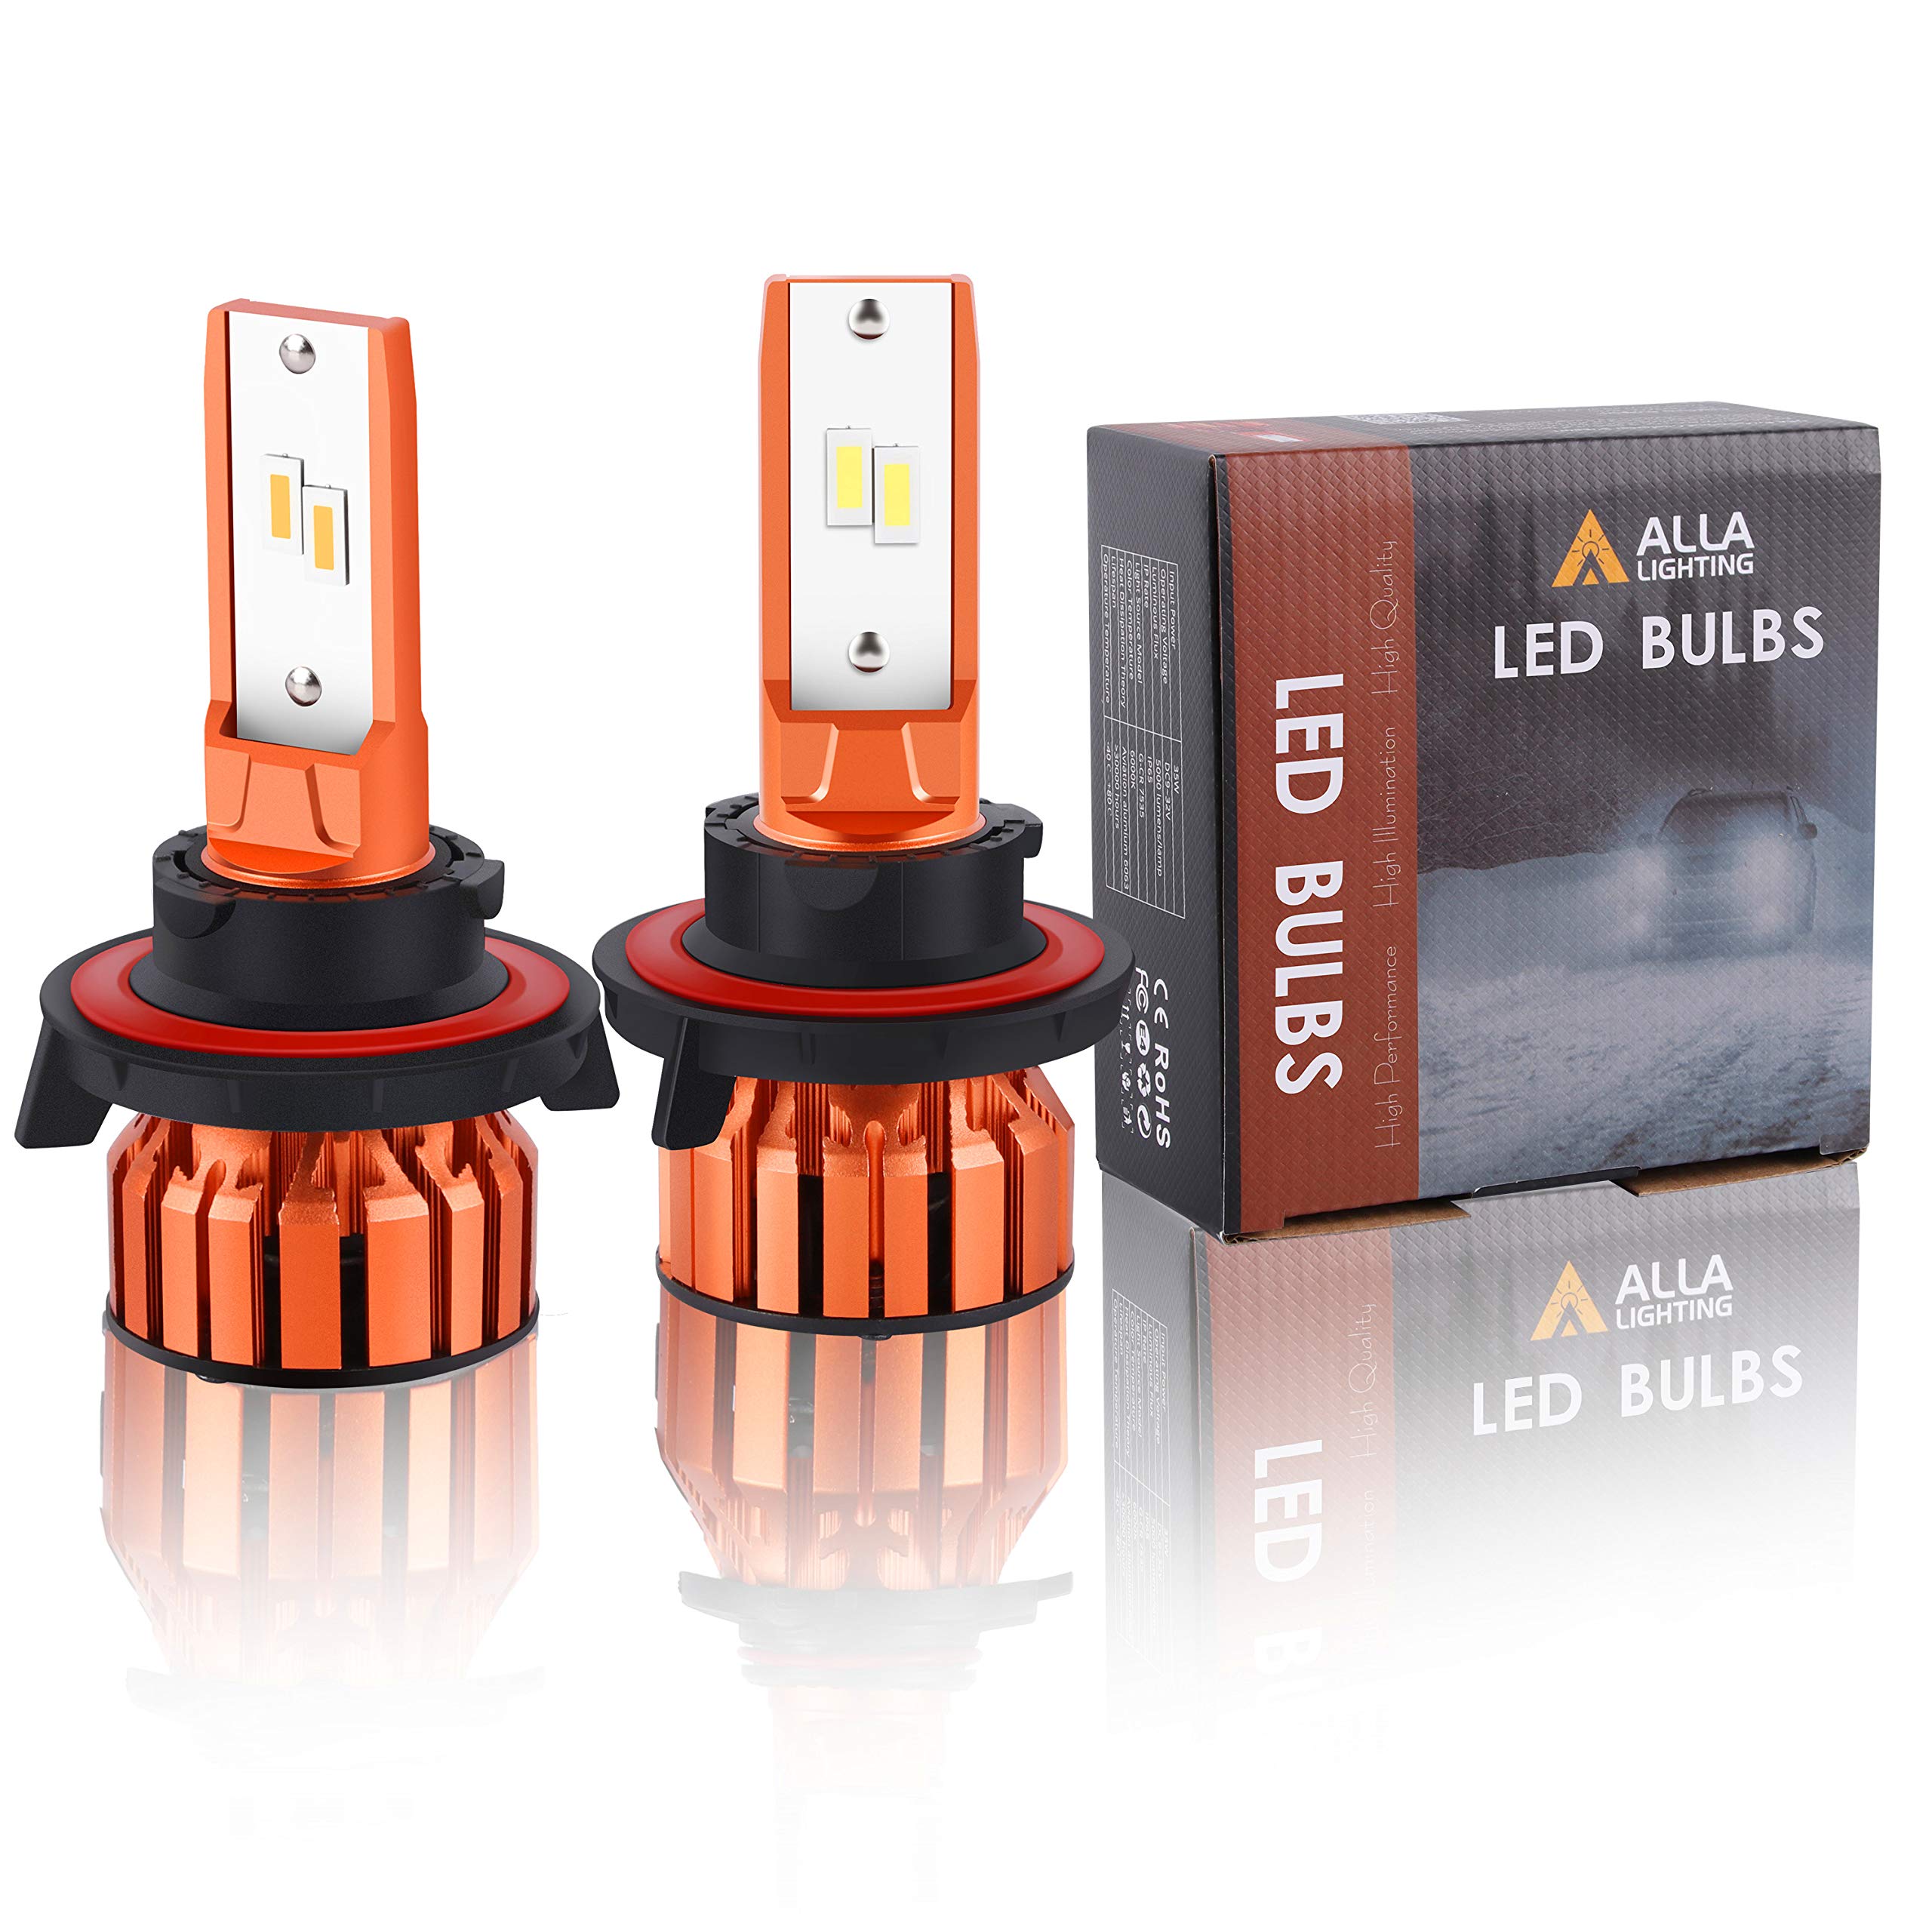 Alla Lighting Vision X-HL 9008 H13 LED Bulbs Xtreme Super Bright 10000 Lumens, Dual High/Low Beam Headlights(off-road use)/DRL Lights Replacement B...